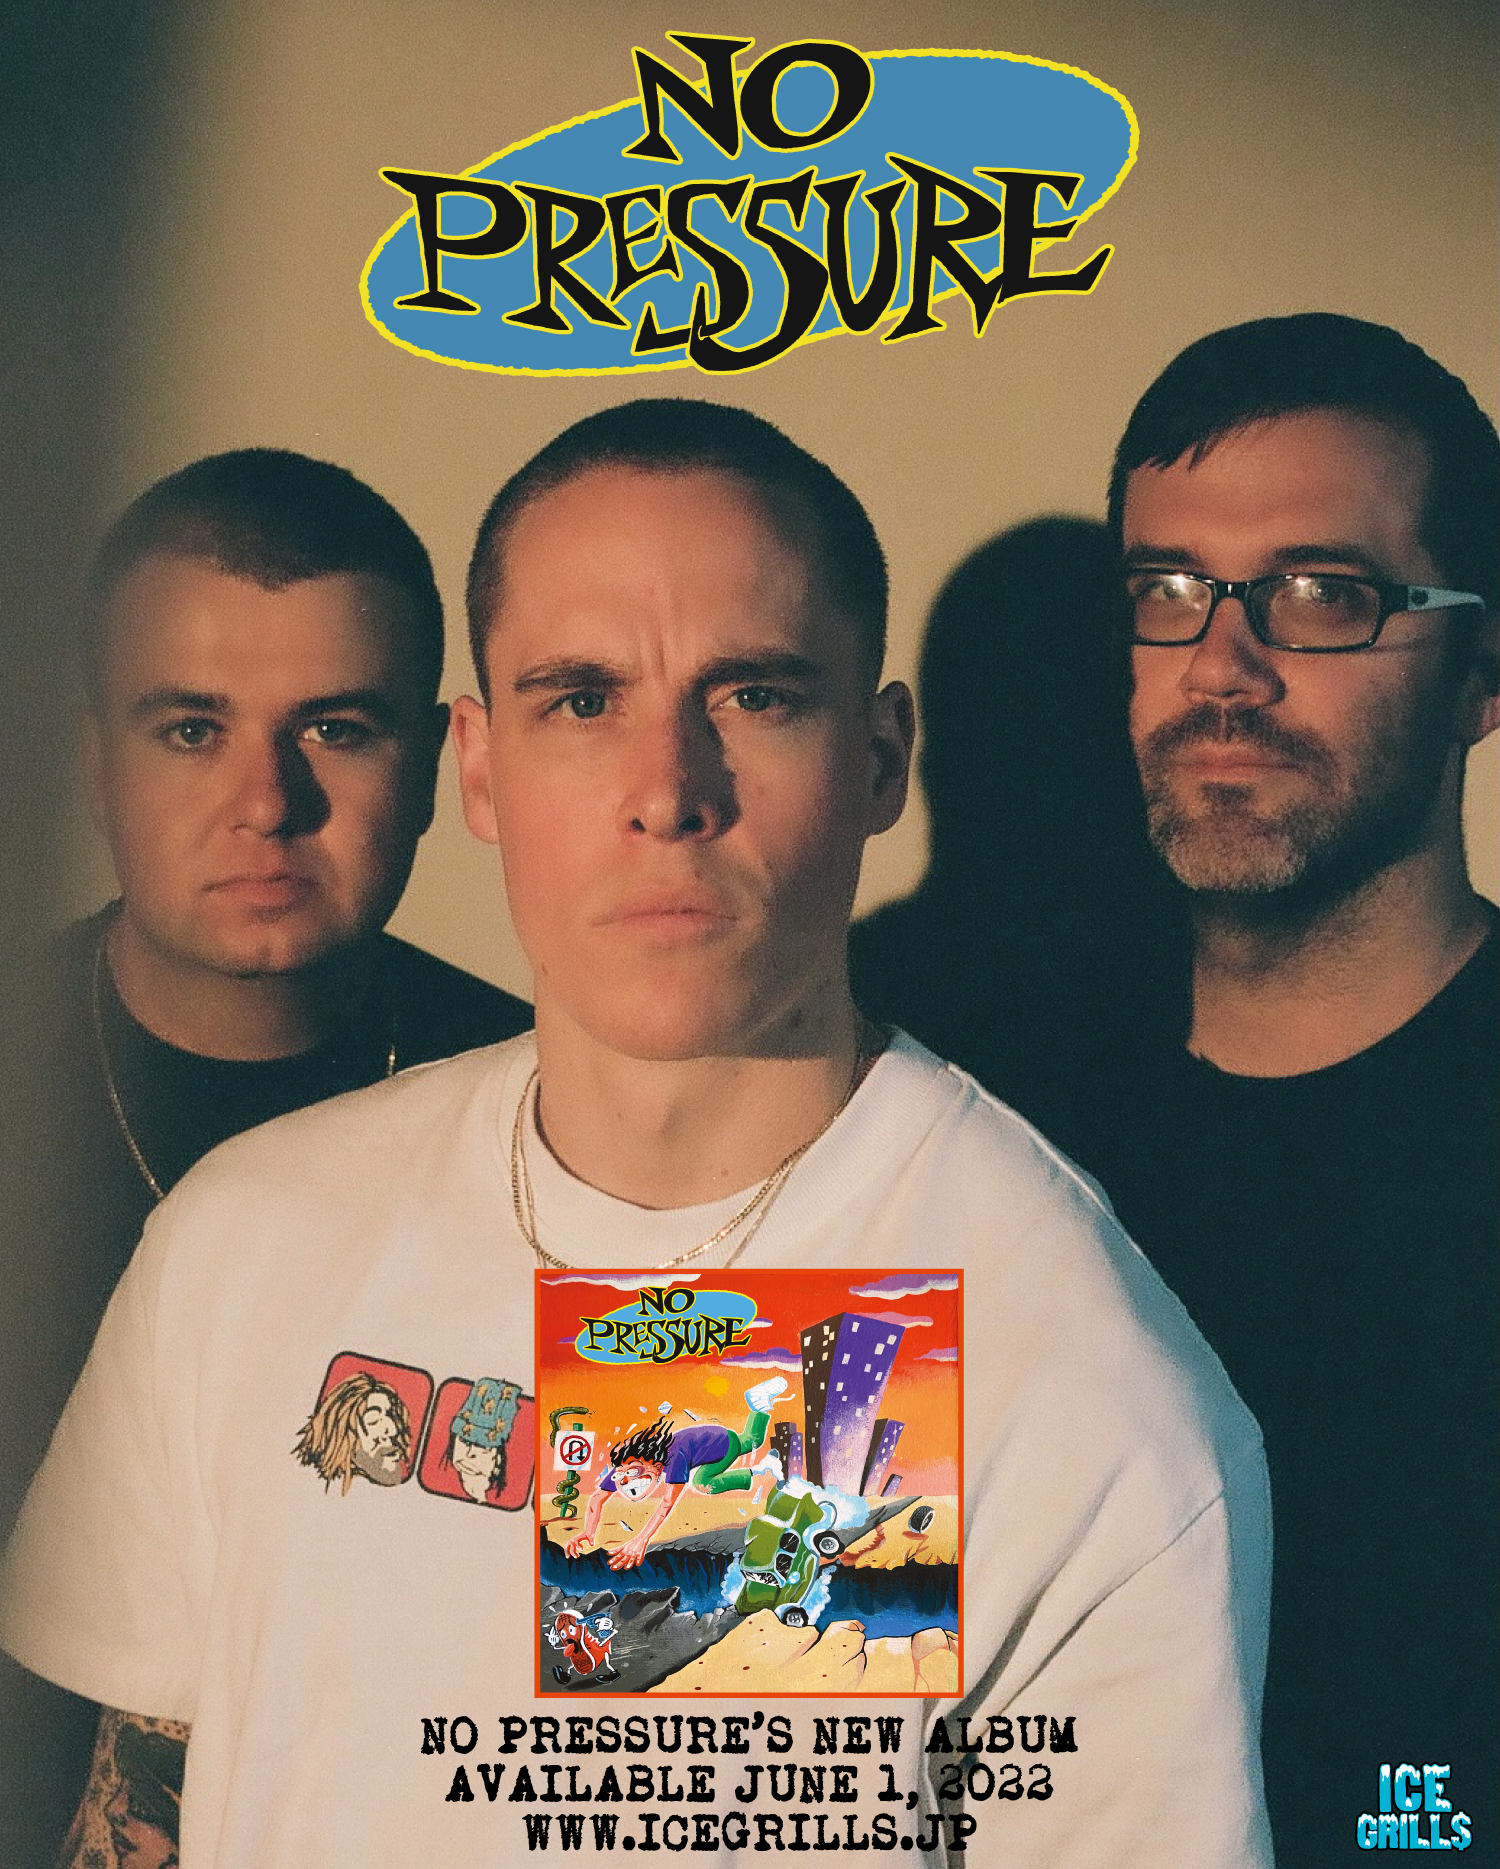 No Pressure – Self-Titled LP out today!